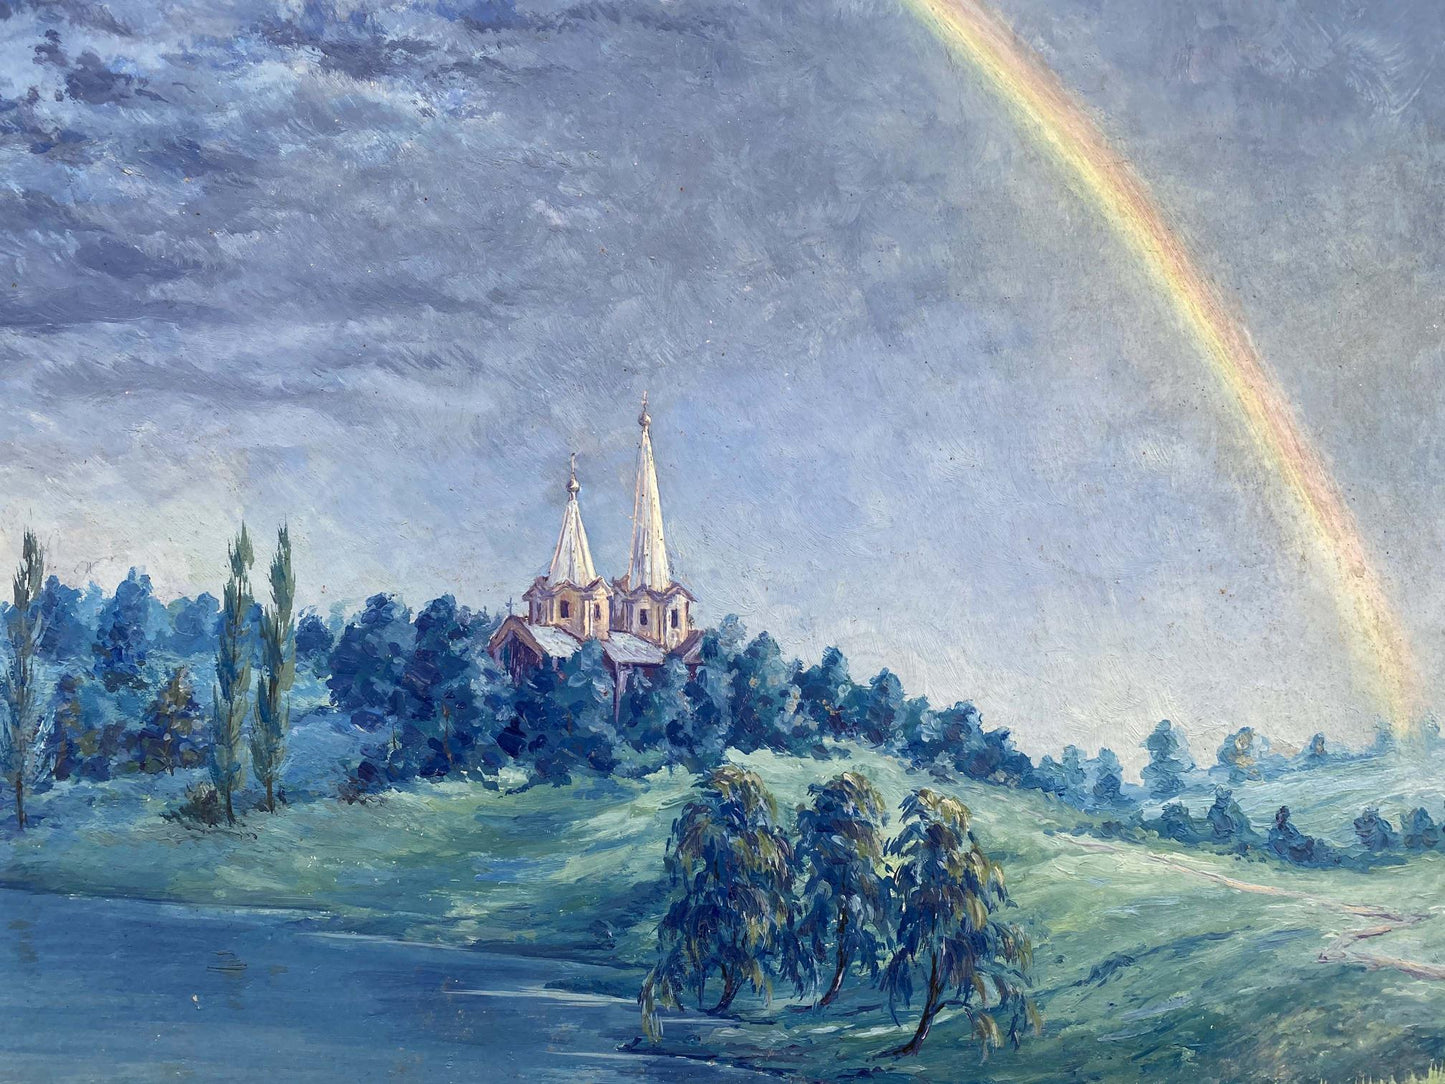 A rainbow graces the sky over the church in Alexander Vladimirovich Lesik's oil painting